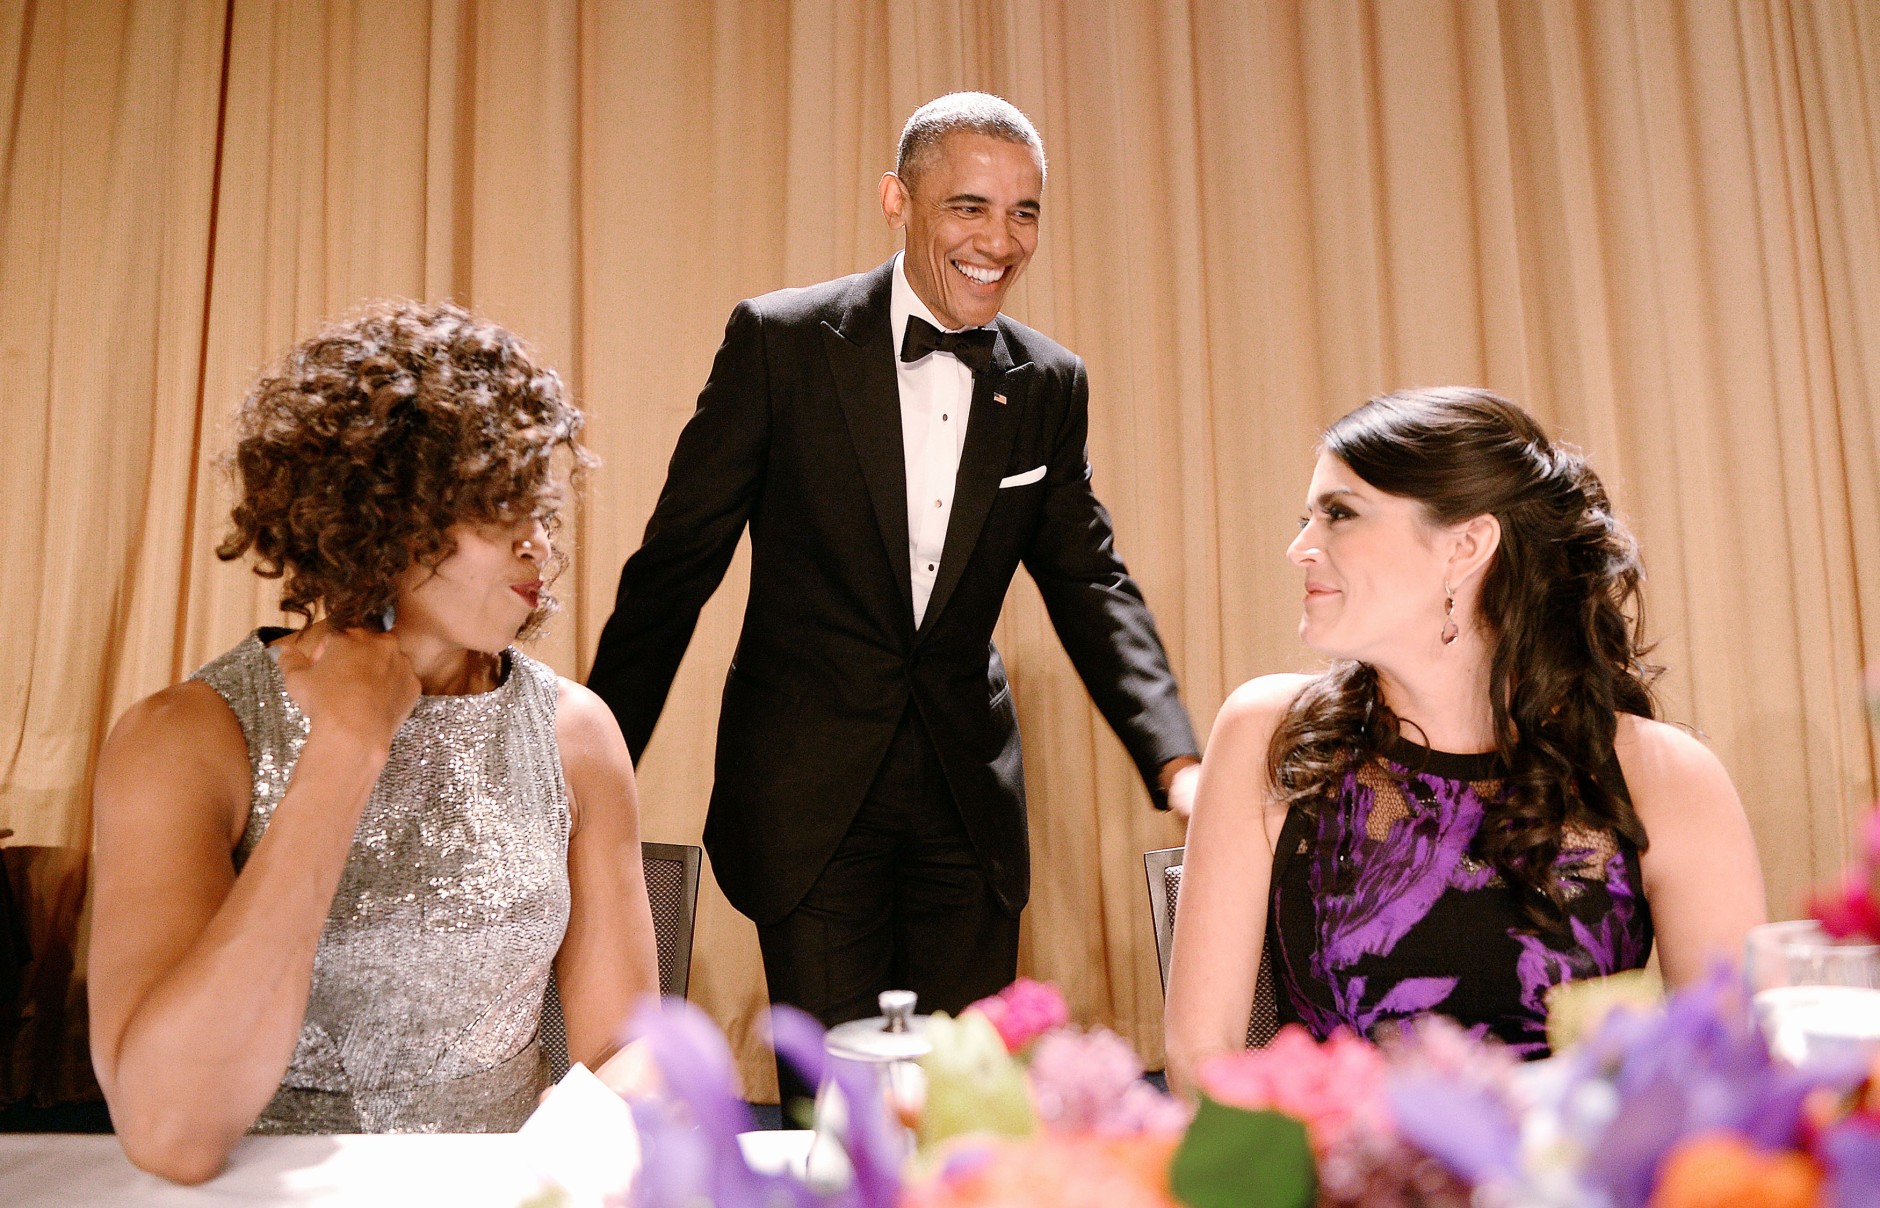 WASHINGTON, DC - APRIL 25: First Lady Michelle Obama, President Barack Obama and comedienne Cecily Strong of the Saturday Night Live show chat during the annual White House Correspondent's Association Gala at the Washington Hilton hotel April 25, 2015 in Washington, D.C. The dinner is an annual event attended by journalists, politicians and celebrities. (Photo by Olivier Douliery-Pool/Getty Images)